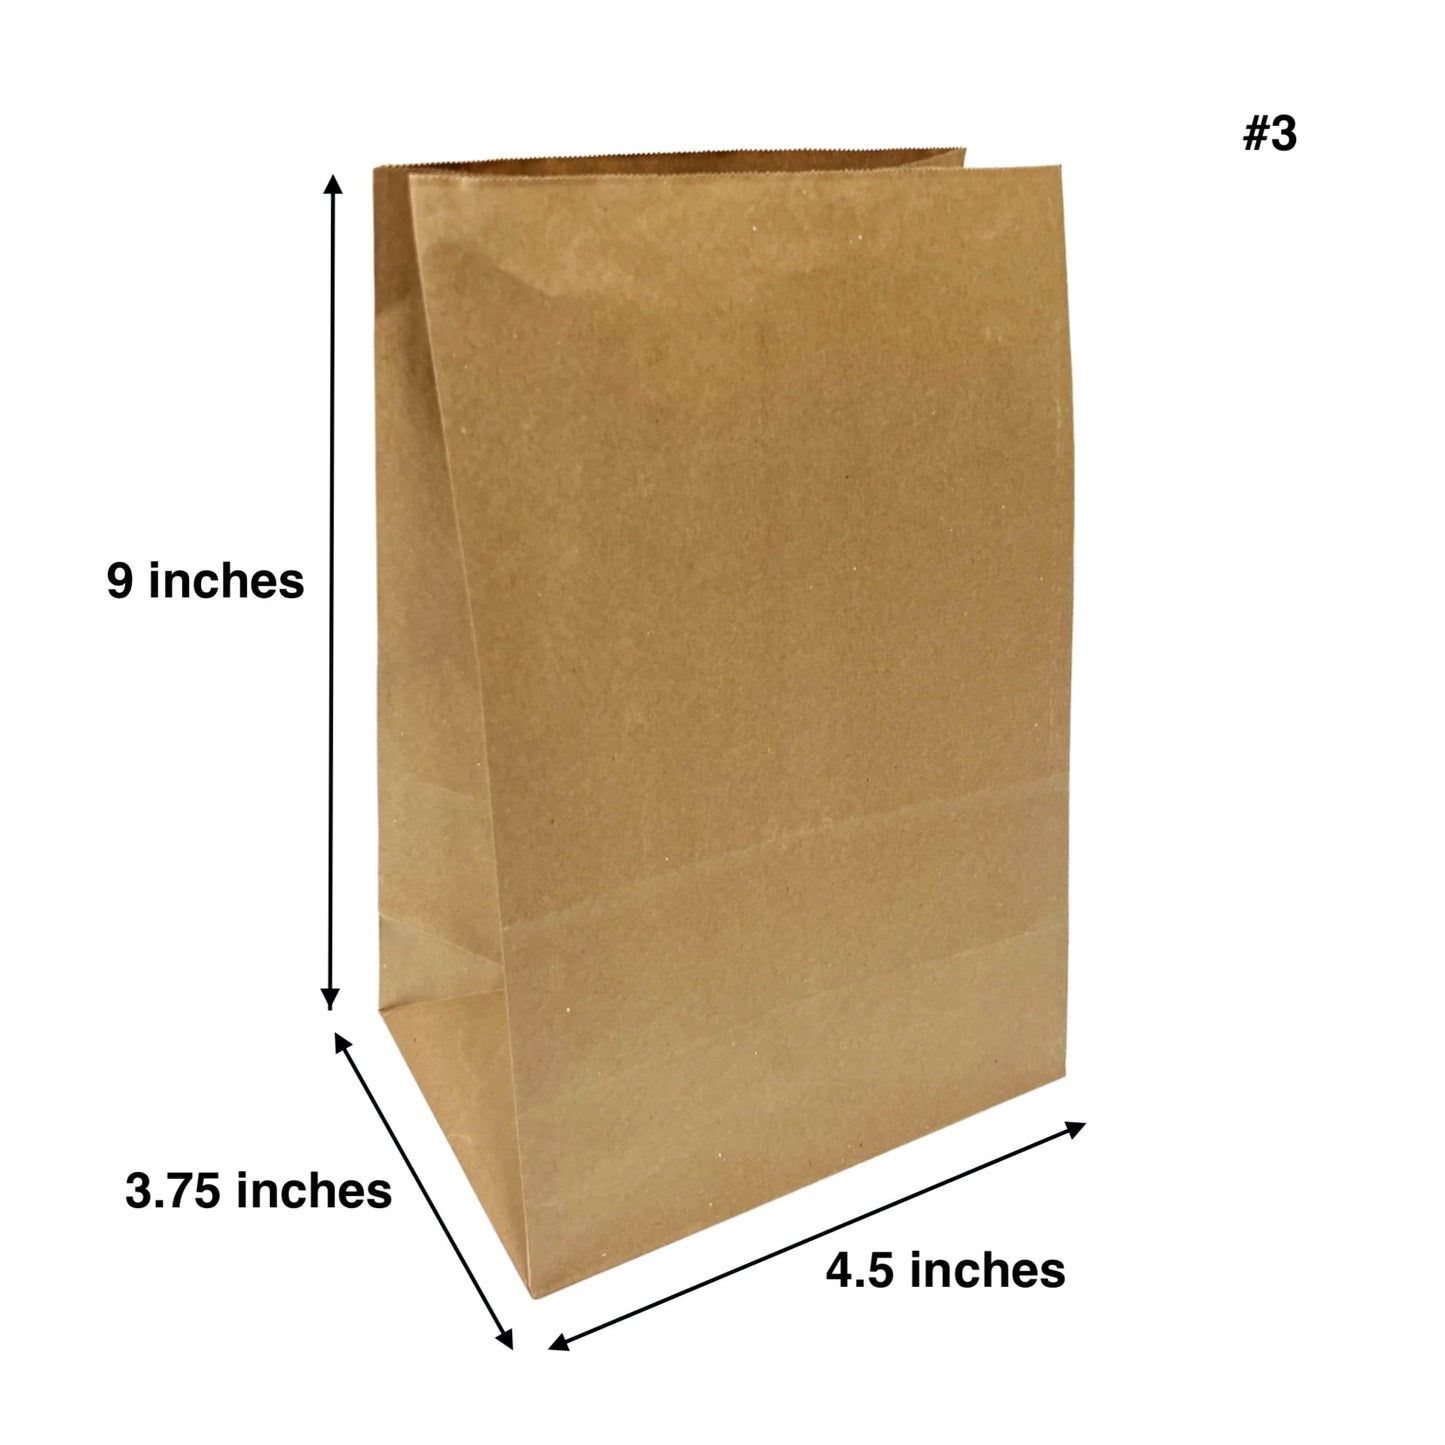 500pcs #3 Grocery Bags 4.5x3.75x9 inches; $0.02/pc